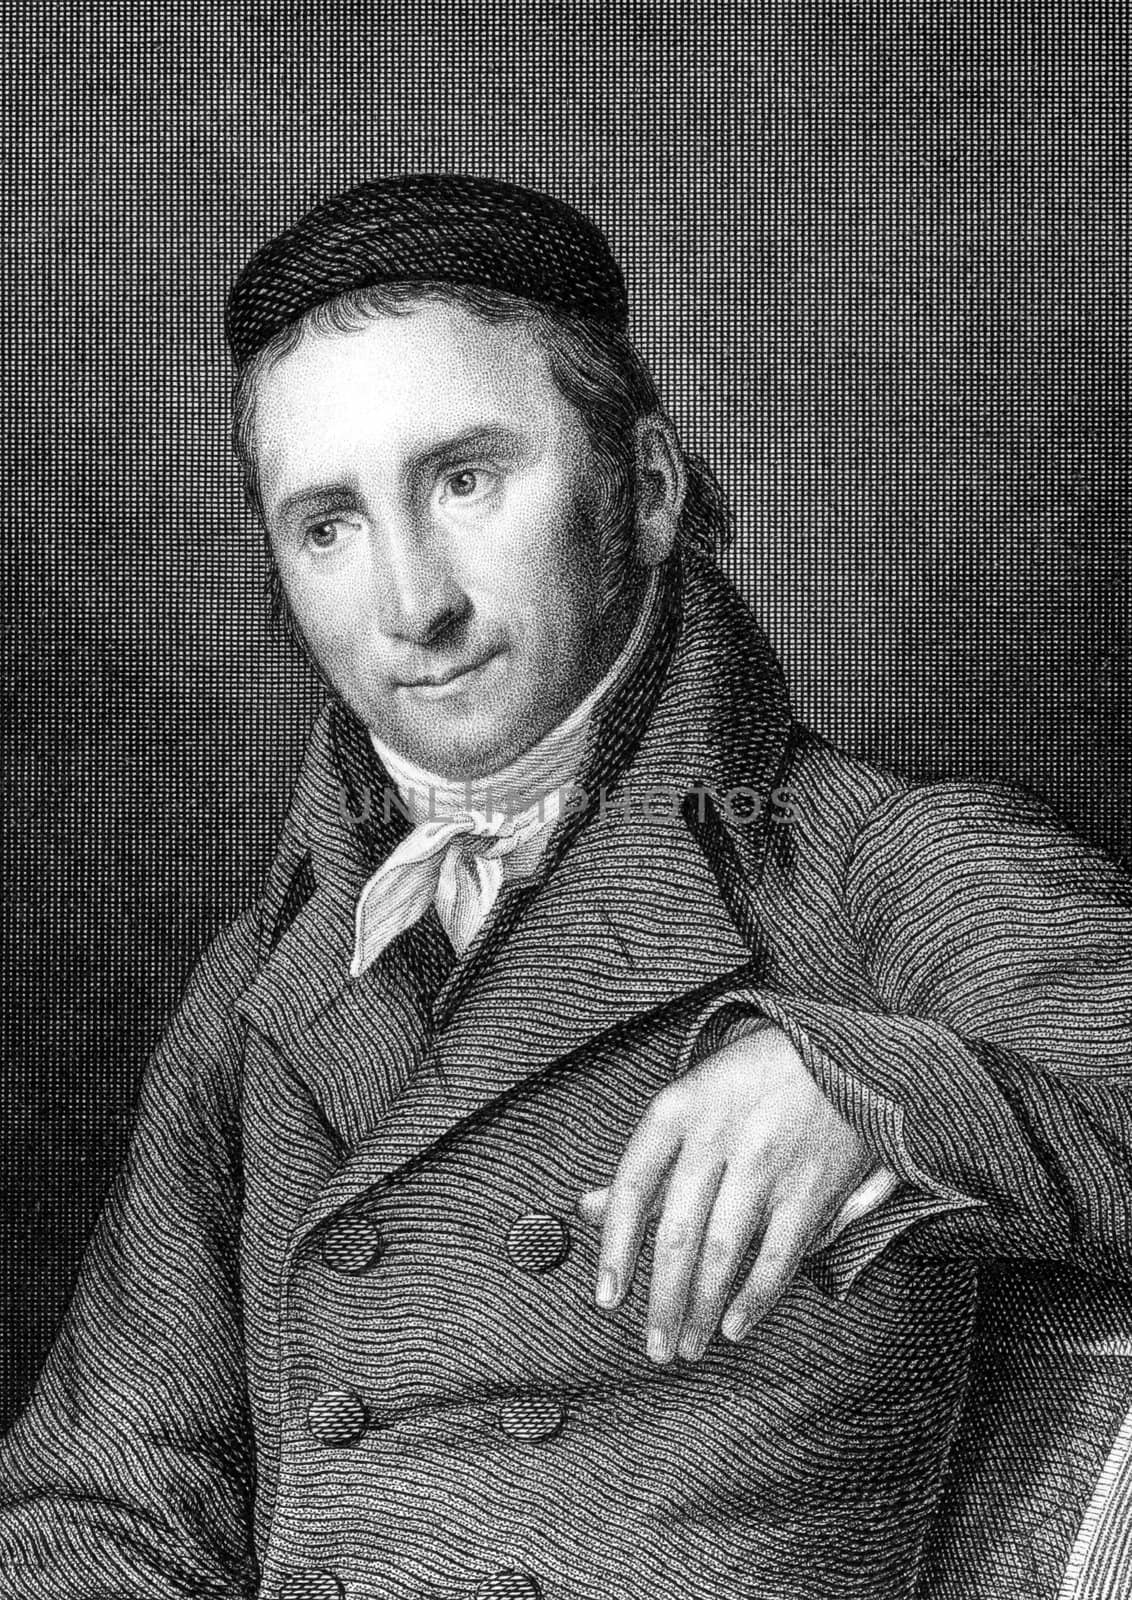 Johann Heinrich Bernhard Draseke (1774-1849) on engraving from 1859. German Protestant theologian, General Superintendent and Bishop. Engraved by Nordheim and published in Meyers Konversations-Lexikon, Germany,1859.